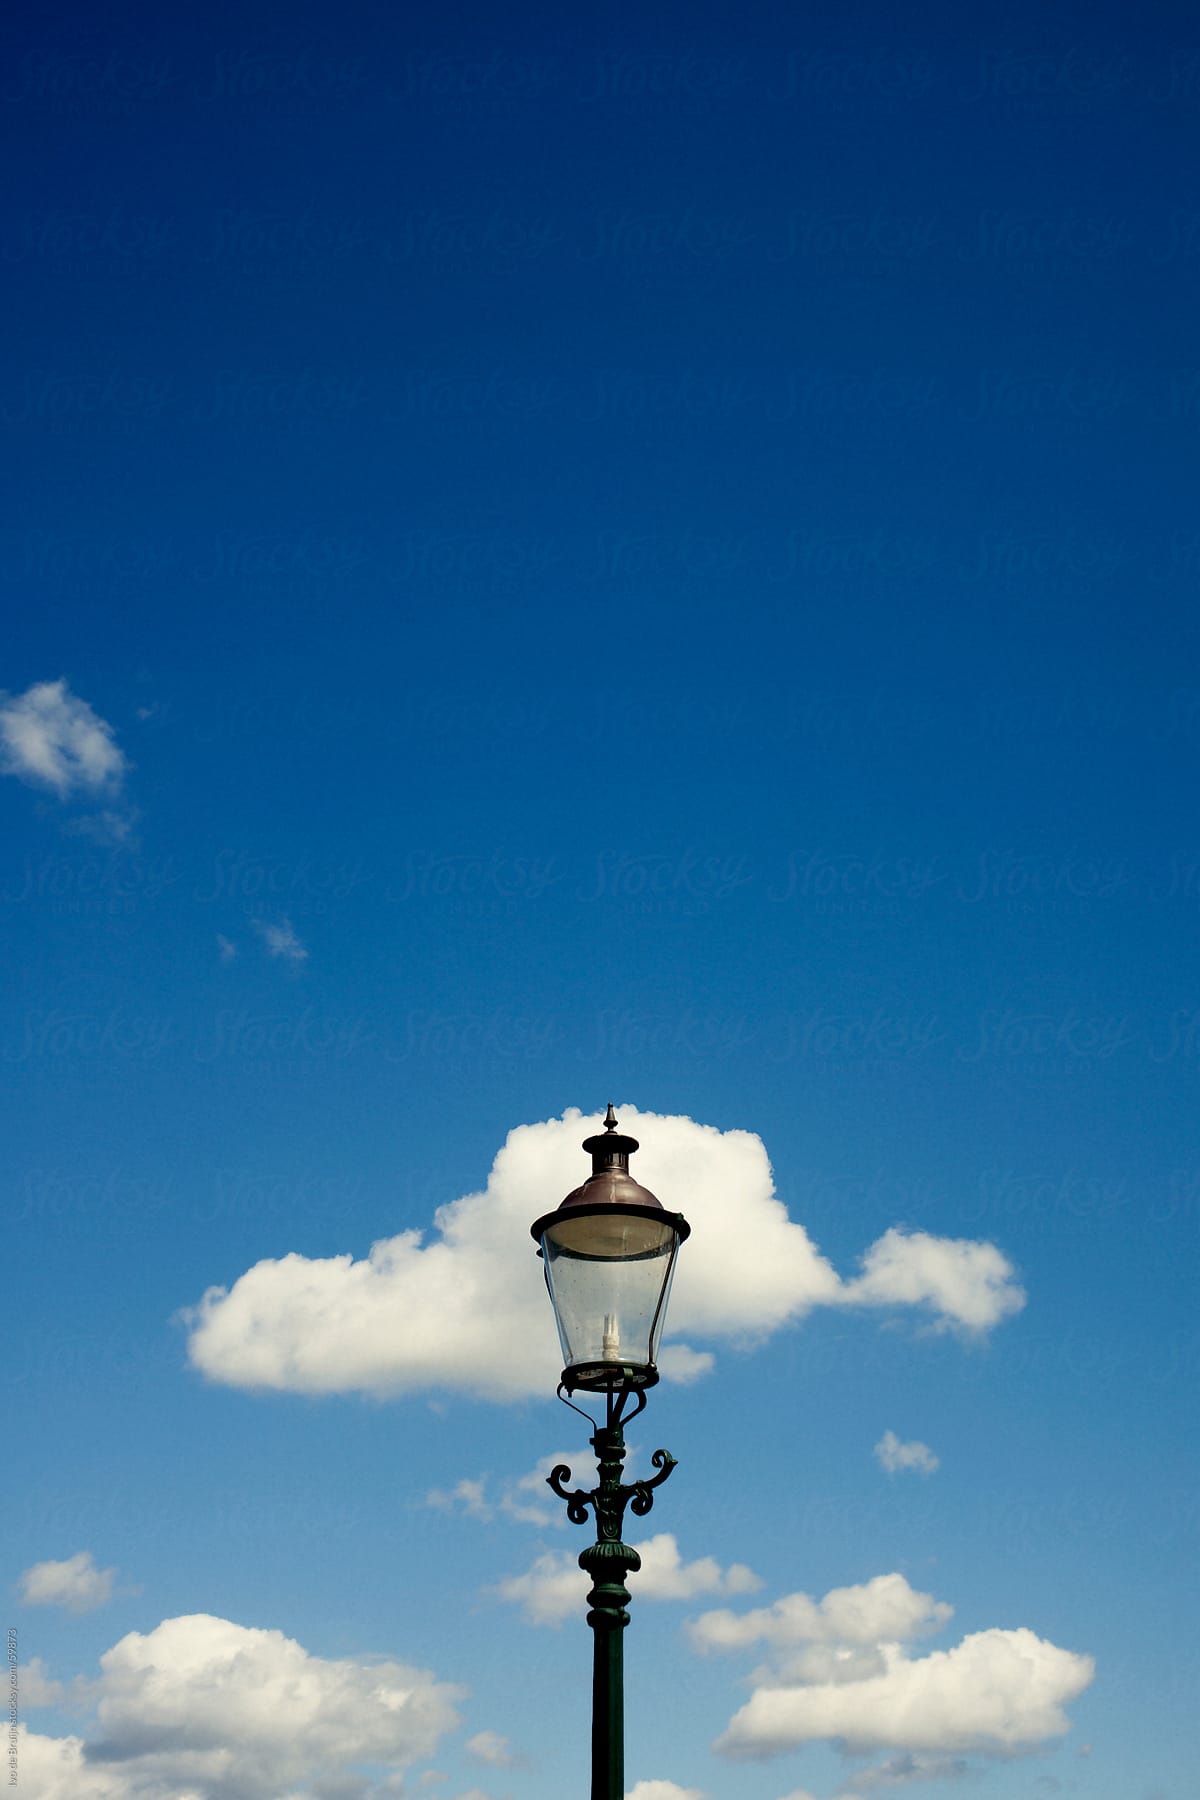 A classic lantern with a bright blue sky with some clouds